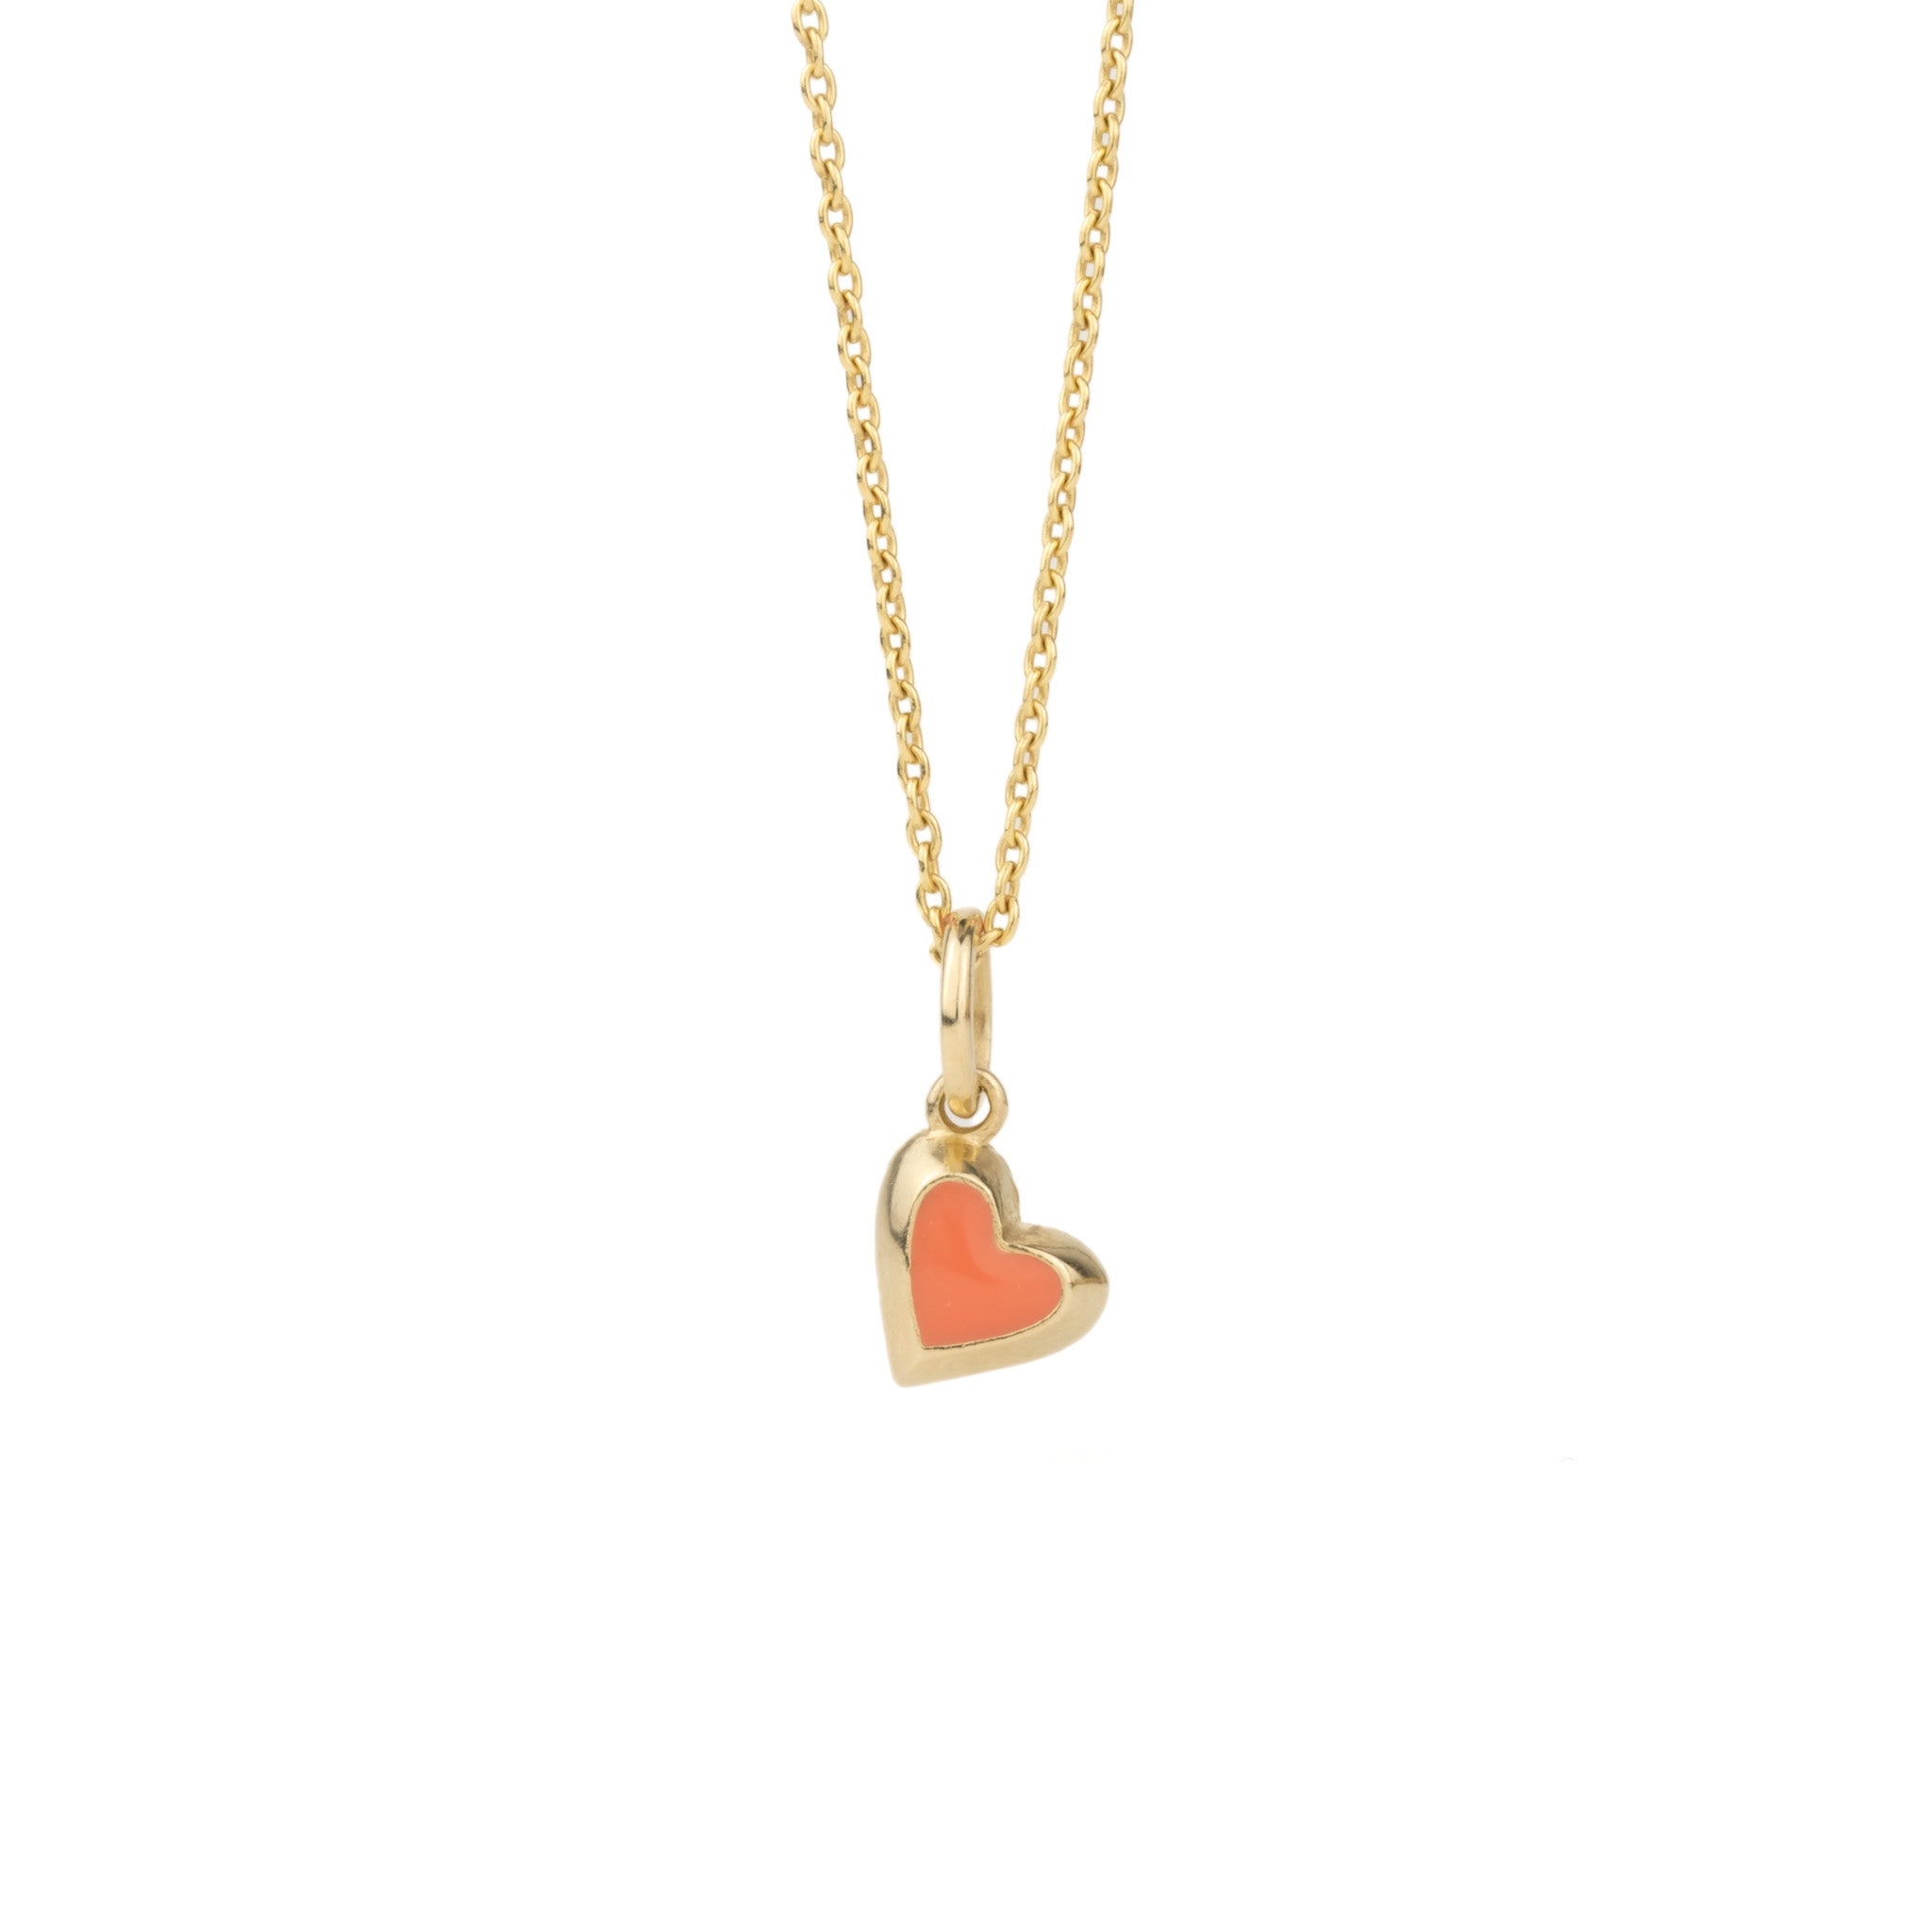 An Aiden Jae Mini Reversible Heart Charm Necklace on a white background.